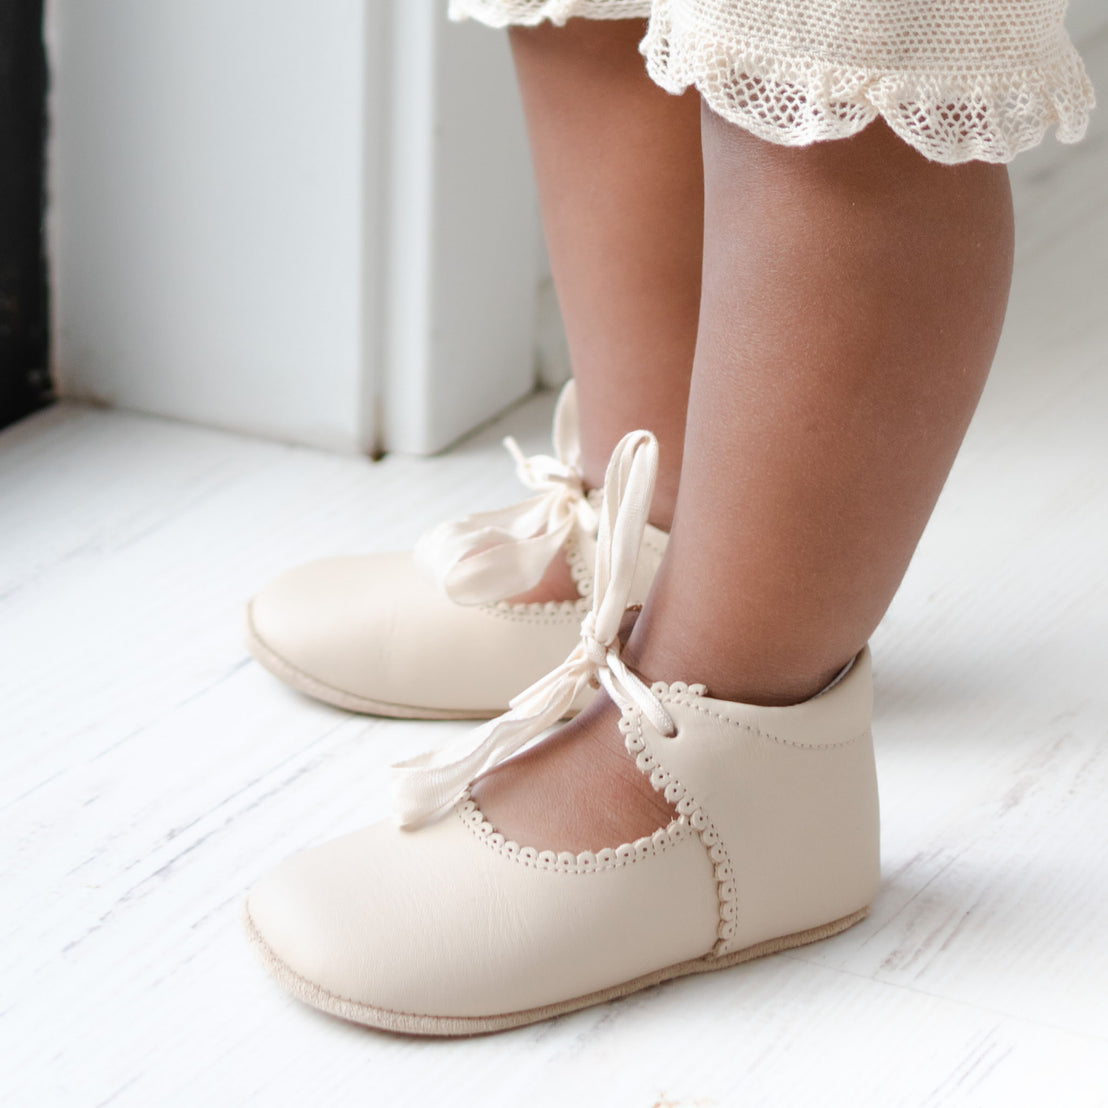 Side view detail of a baby wearing the Tan Tie Mary Janes crafted with tan matte leather with beautiful scallop edge detail and complimenting cotton ribbon tie